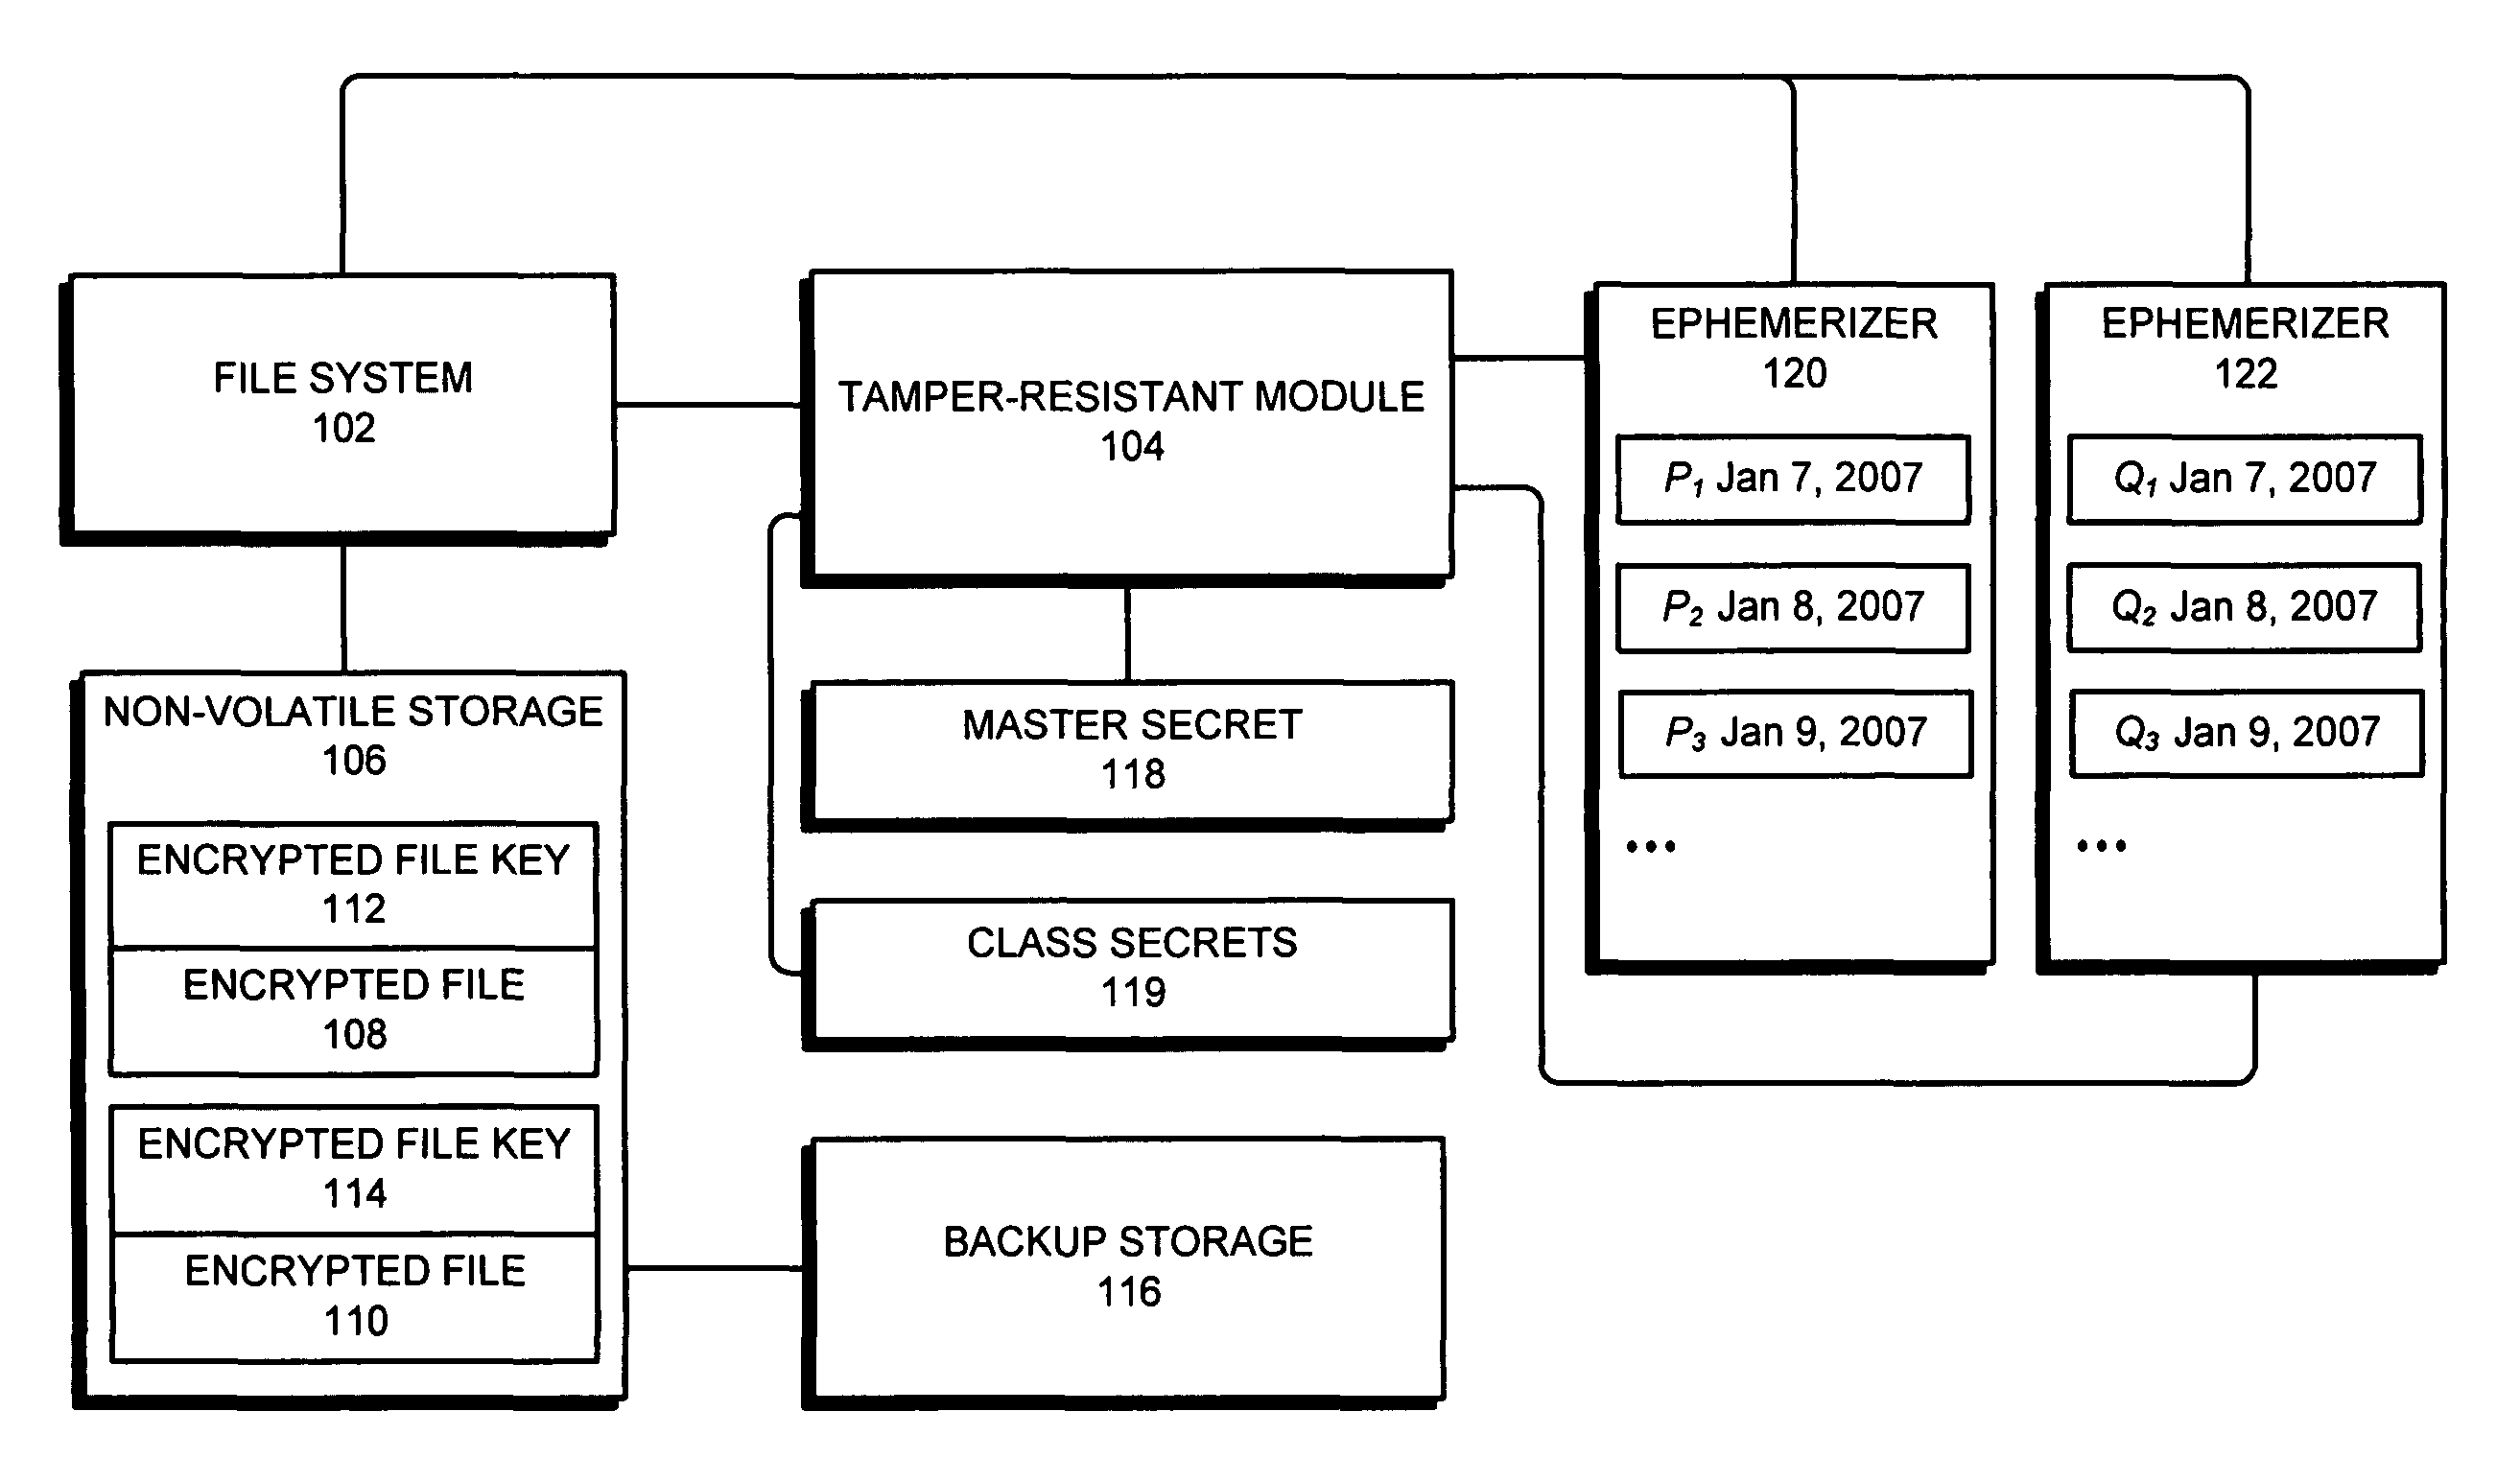 Method and apparatus for accessing an encrypted file system using non-local keys